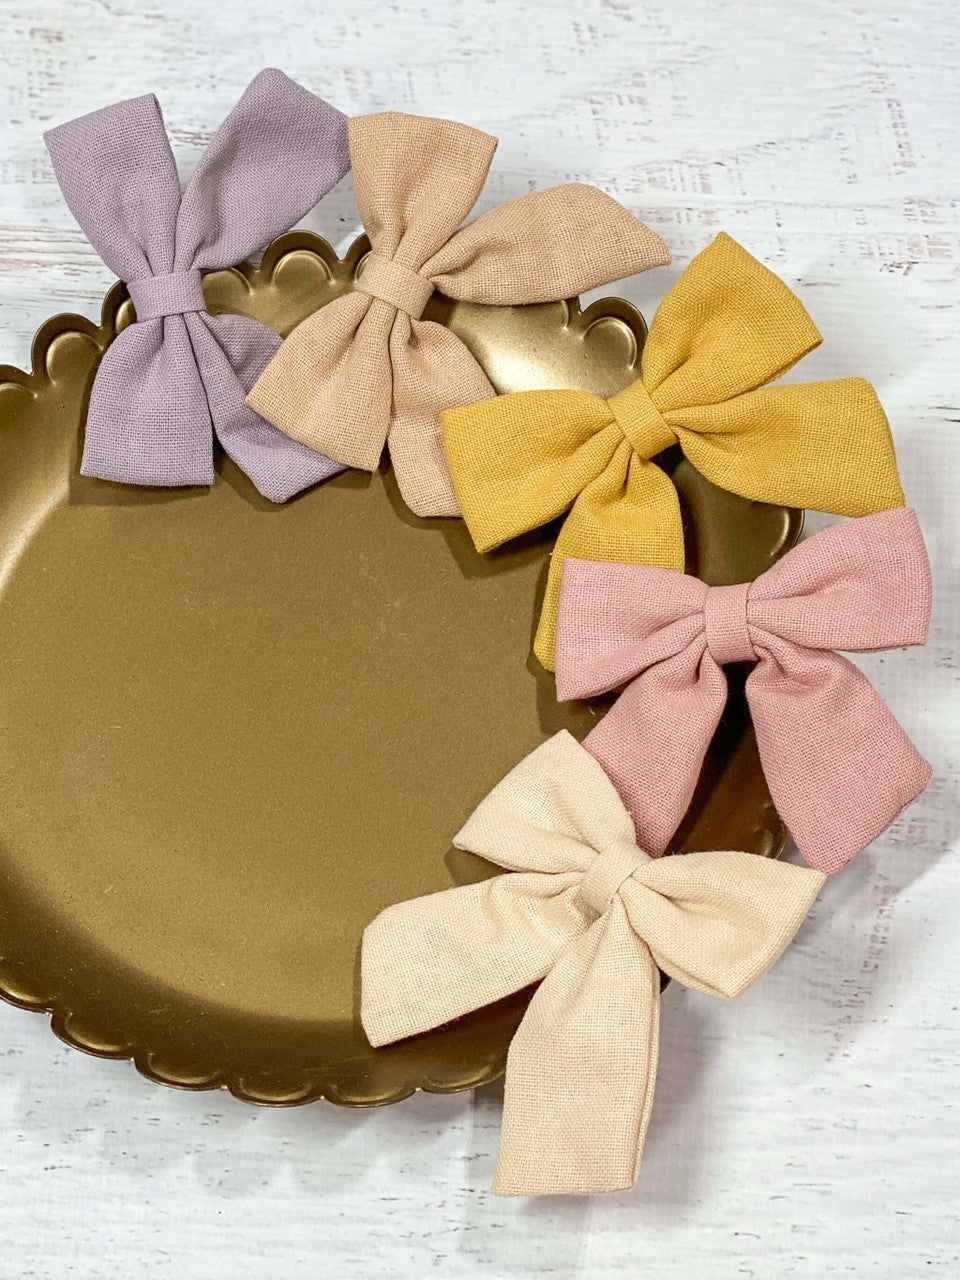 Linen fabric hair bows in 5 color options